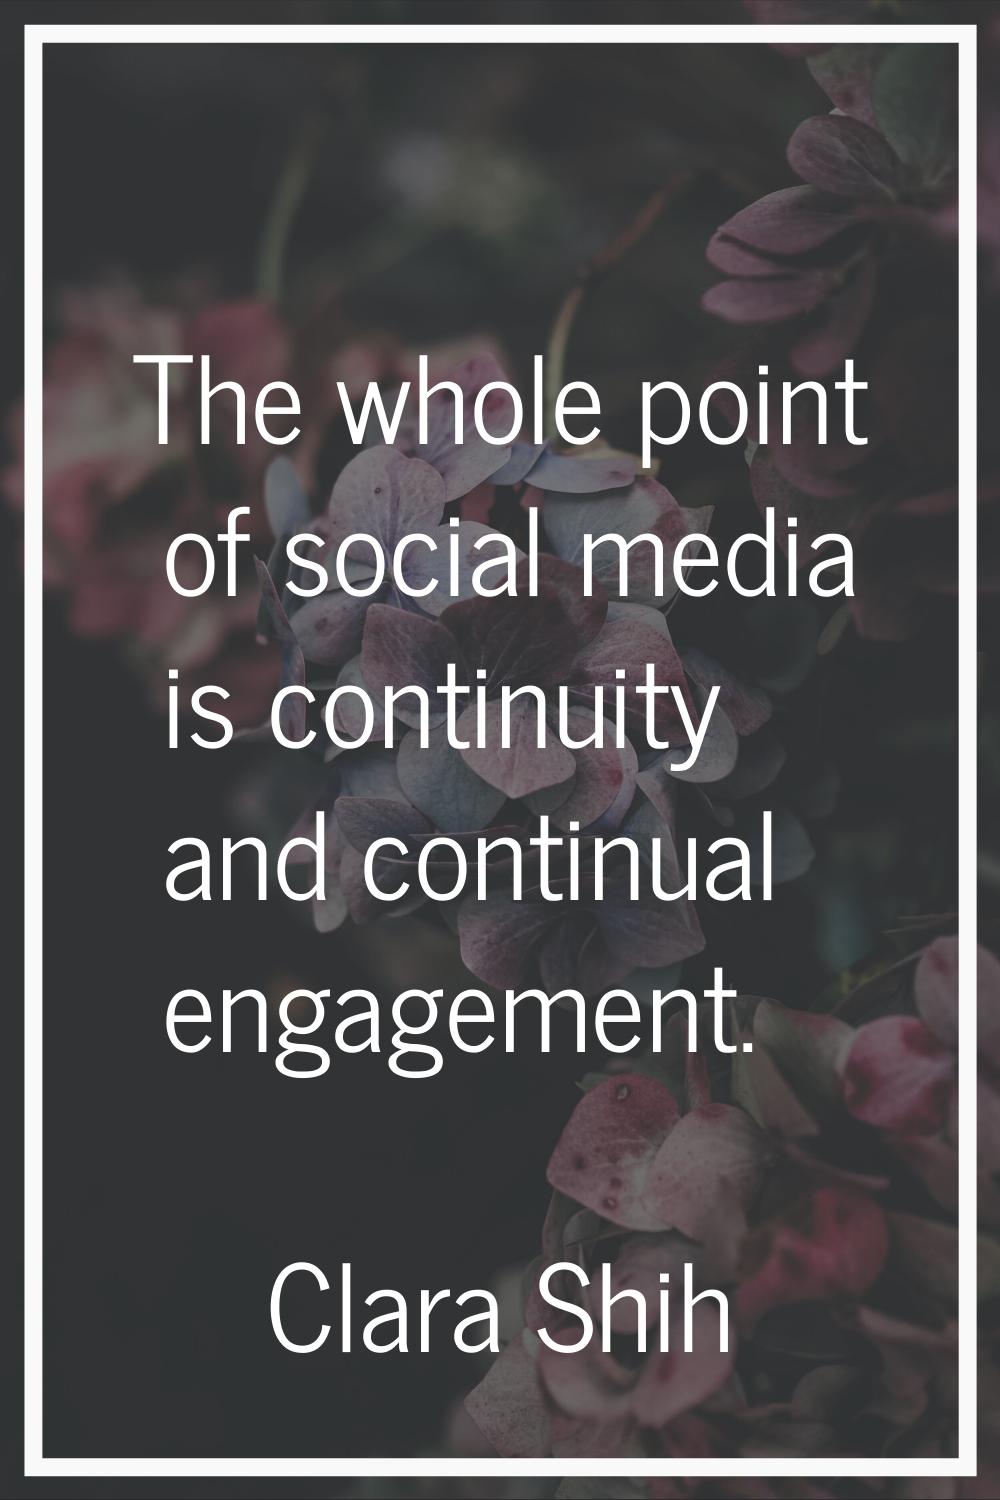 The whole point of social media is continuity and continual engagement.